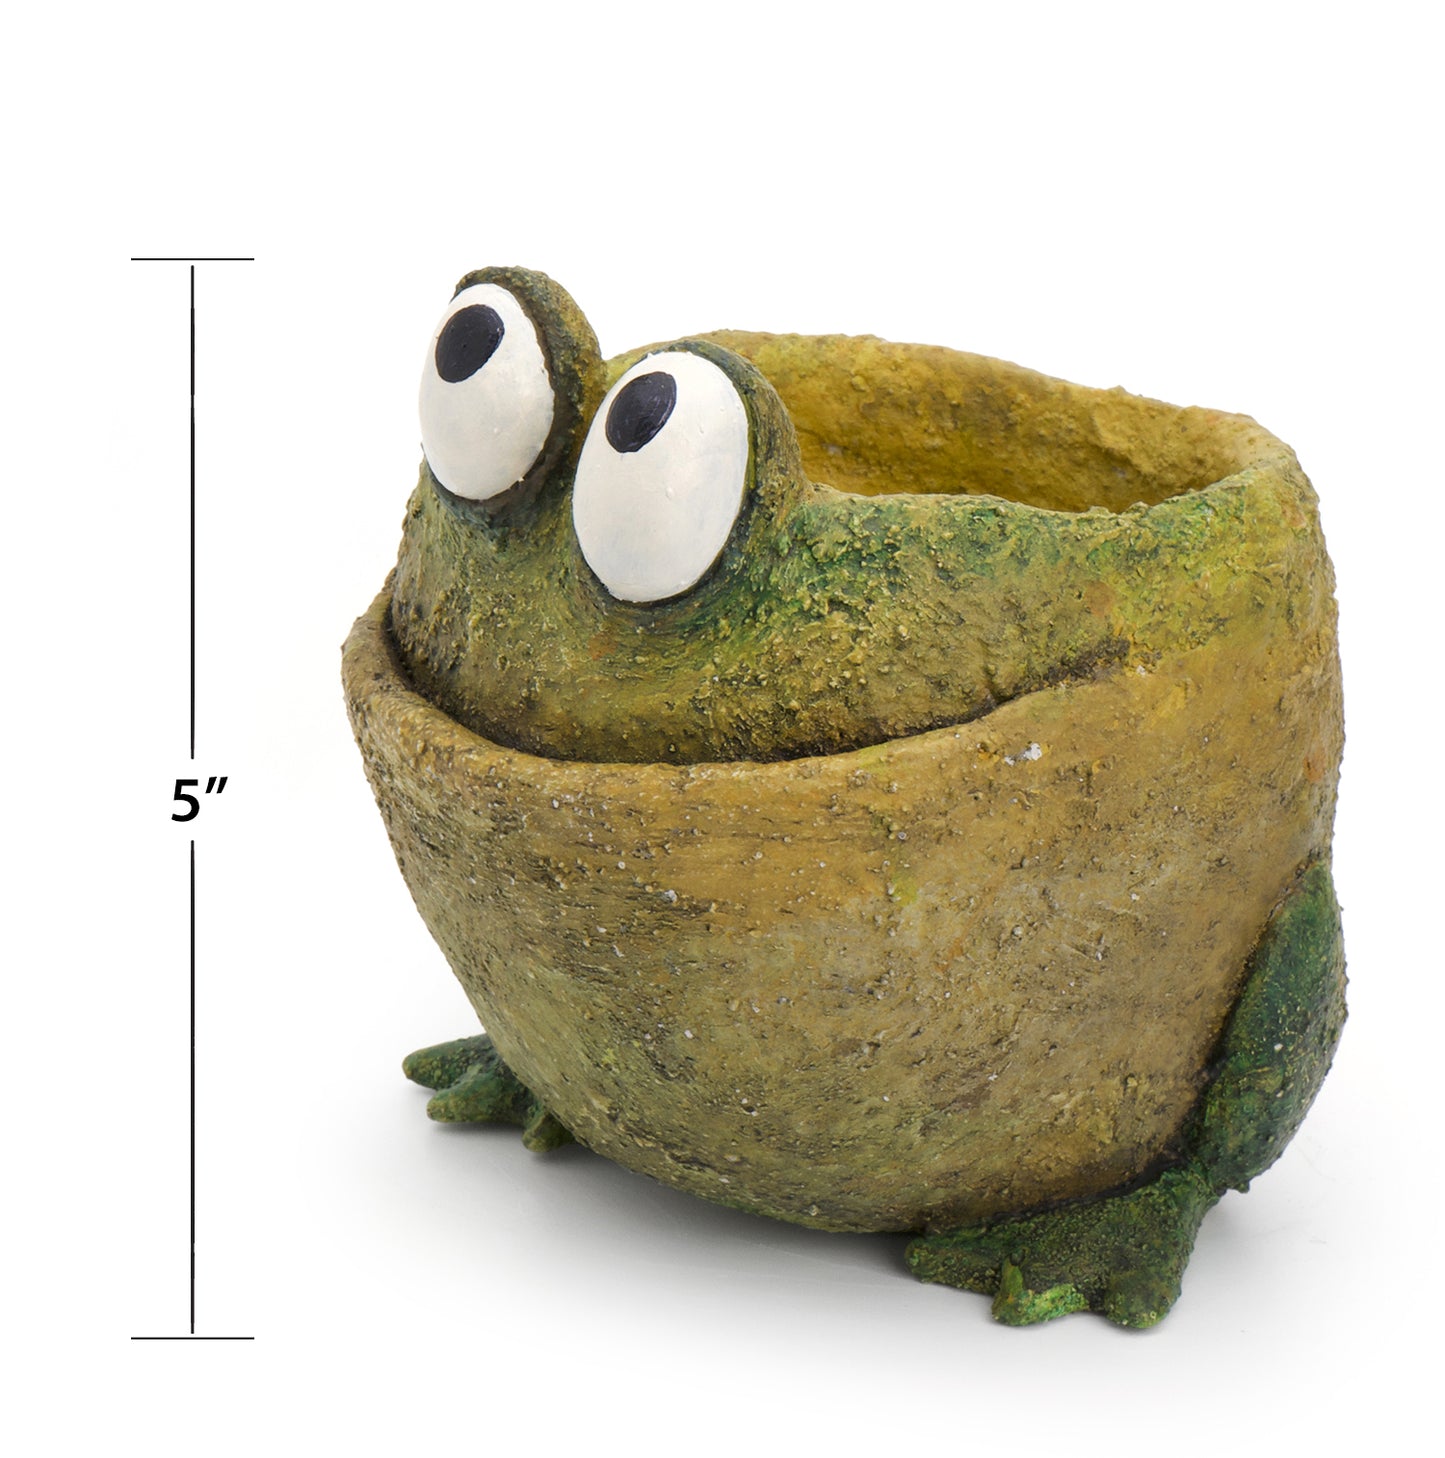 Fred the Frog Planter